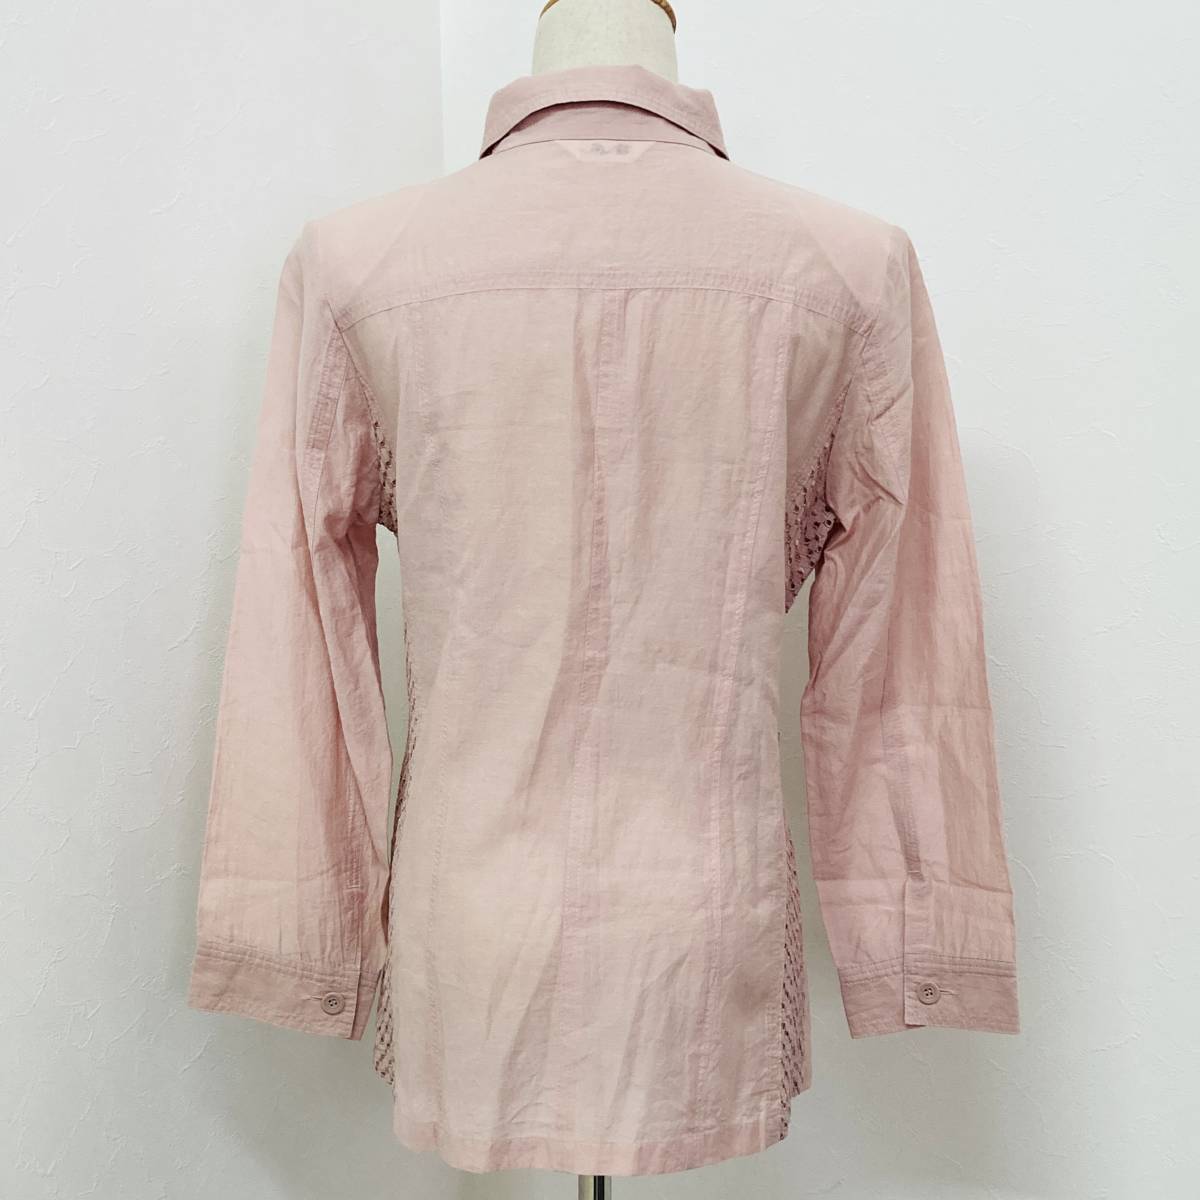 a00541 beautiful goods . flax .. jacket blouse shirt long sleeve thin shoulder pad attaching embroidery size 9 pink cotton silk . lady's retro fine quality on goods all-purpose 